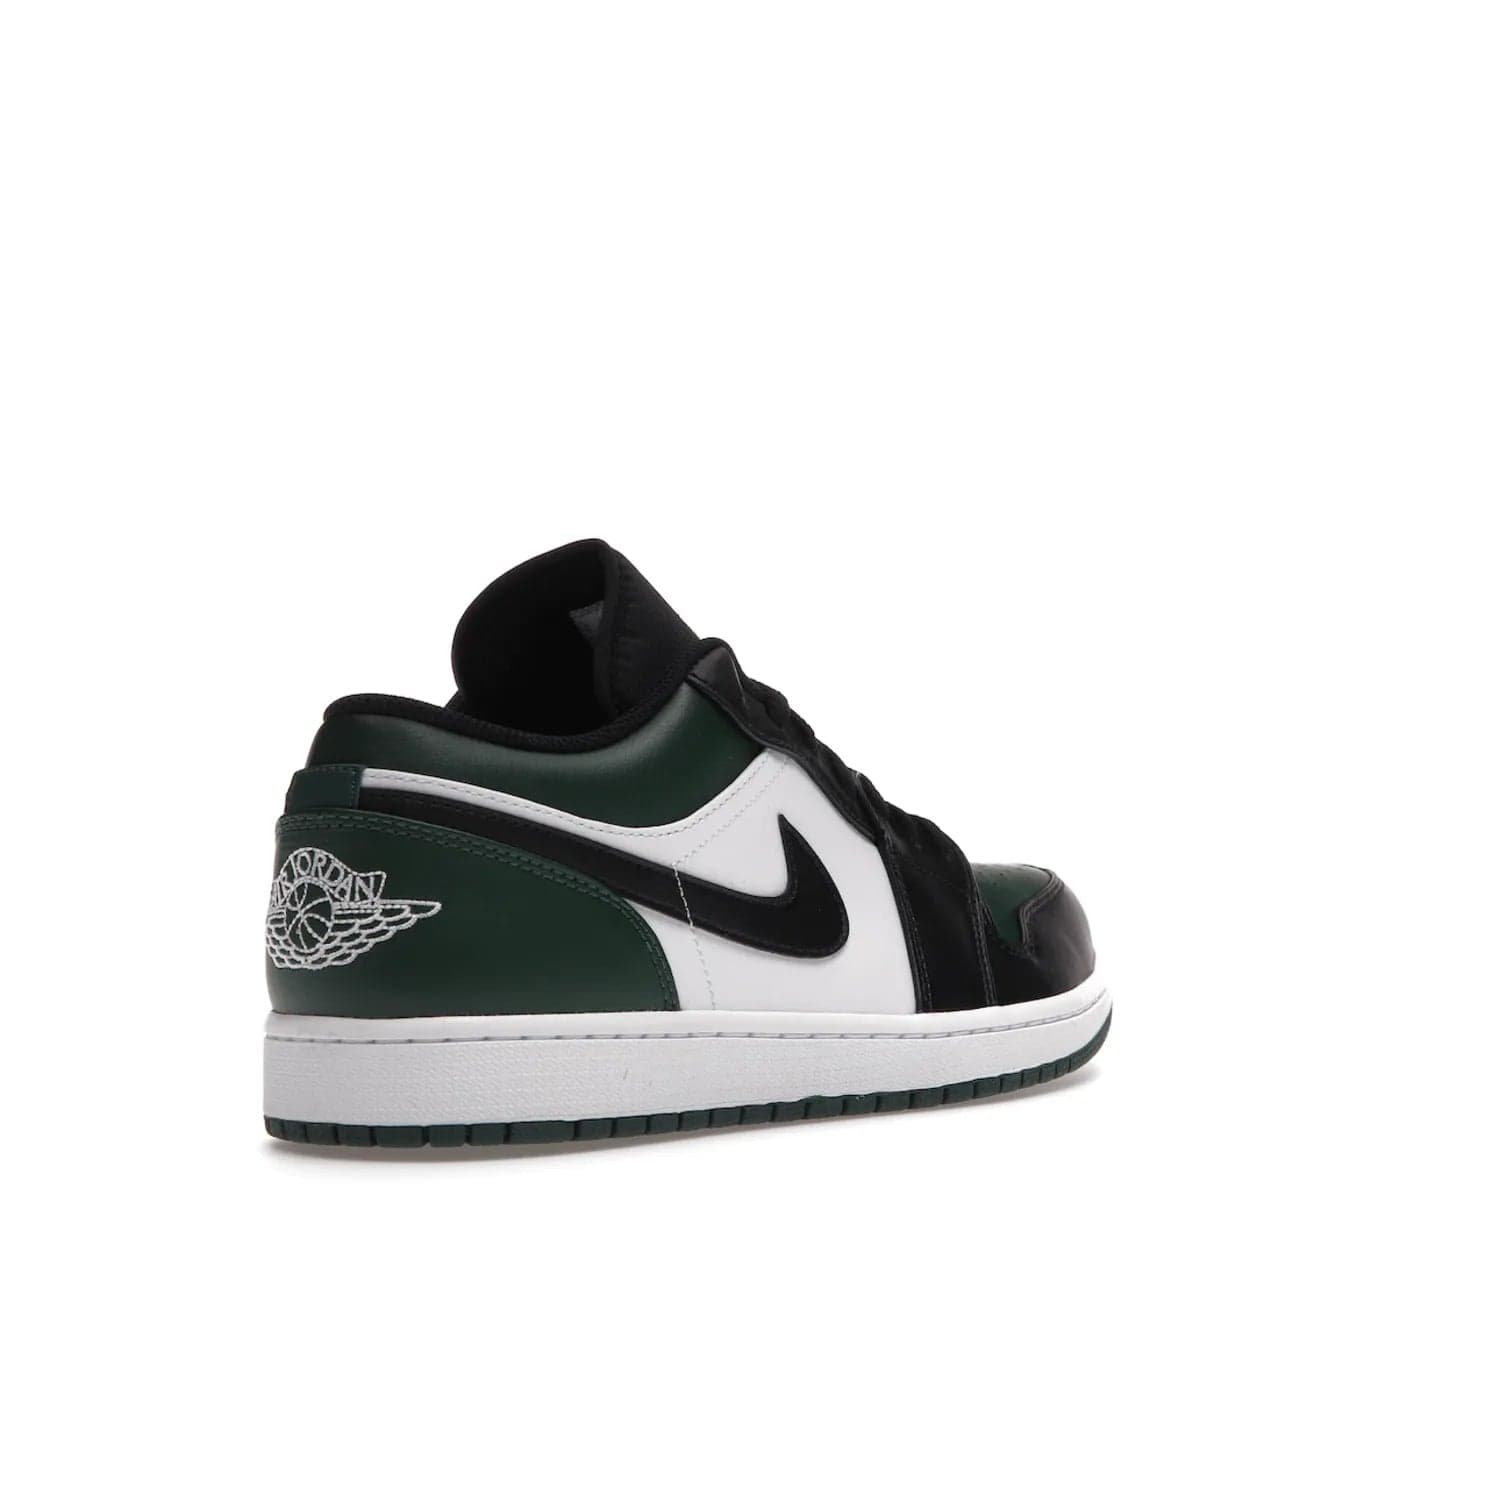 Jordan 1 Low Green Toe - Image 32 - Only at www.BallersClubKickz.com - The Jordan 1 Low Green Toe features white, black and Noble Green leather with black Swoosh. Get the classic Bred Toe-inspired color blocking with green perforated toe box. White and green Air sole completes the design. Released in October 2021 at only $100. Grab your pair now!